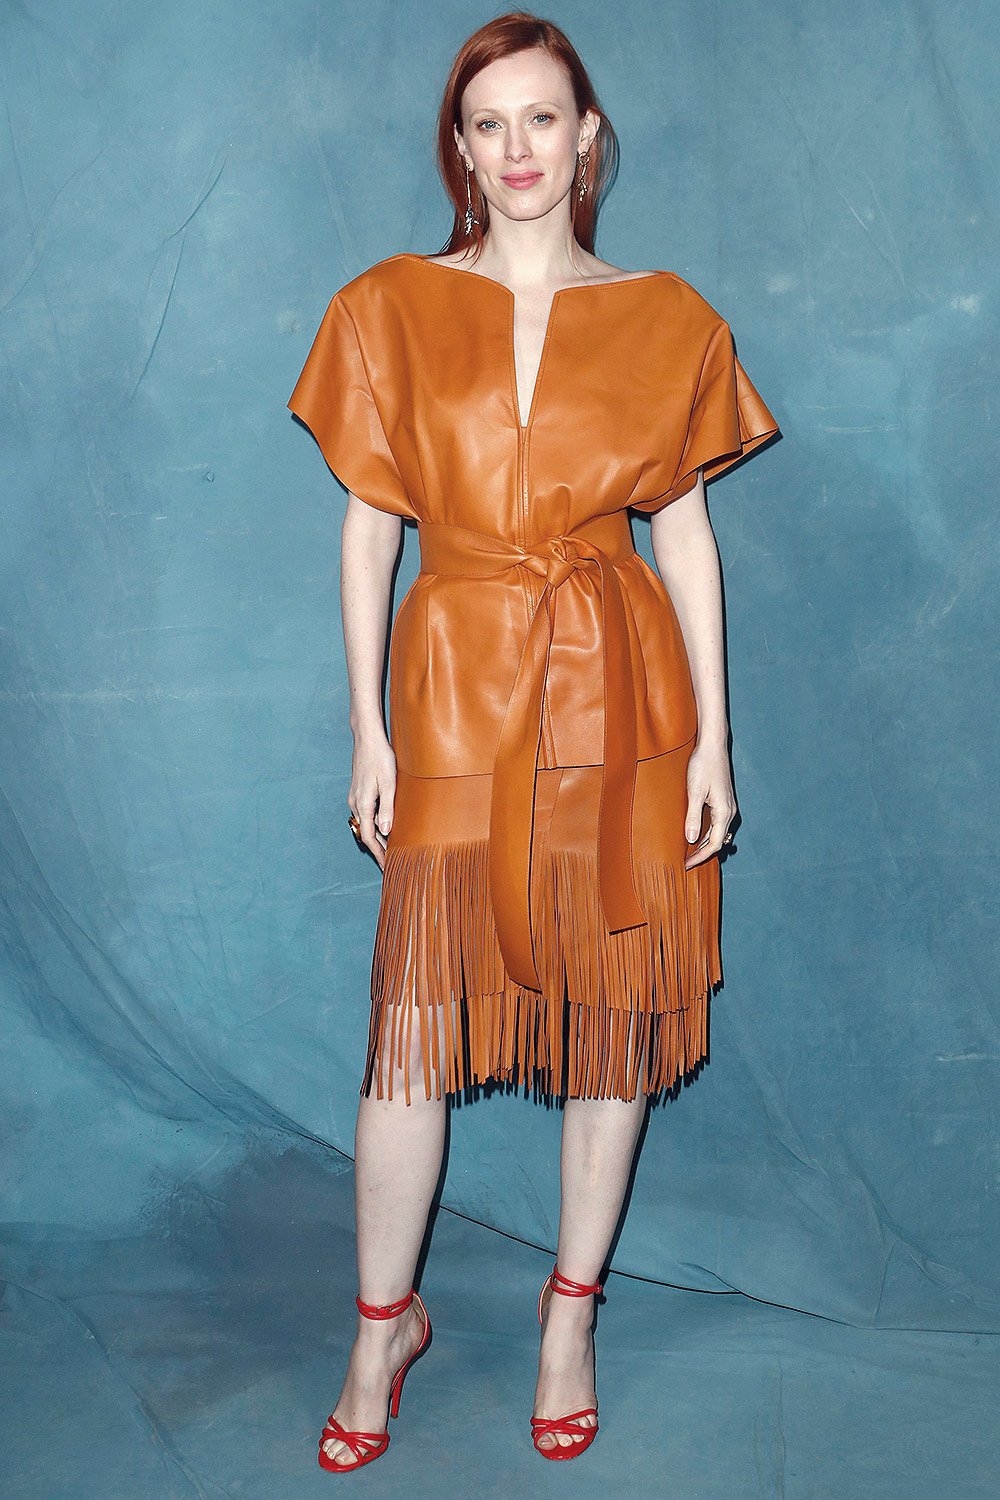 Karen Elson at Givenchy show - Leather Dress